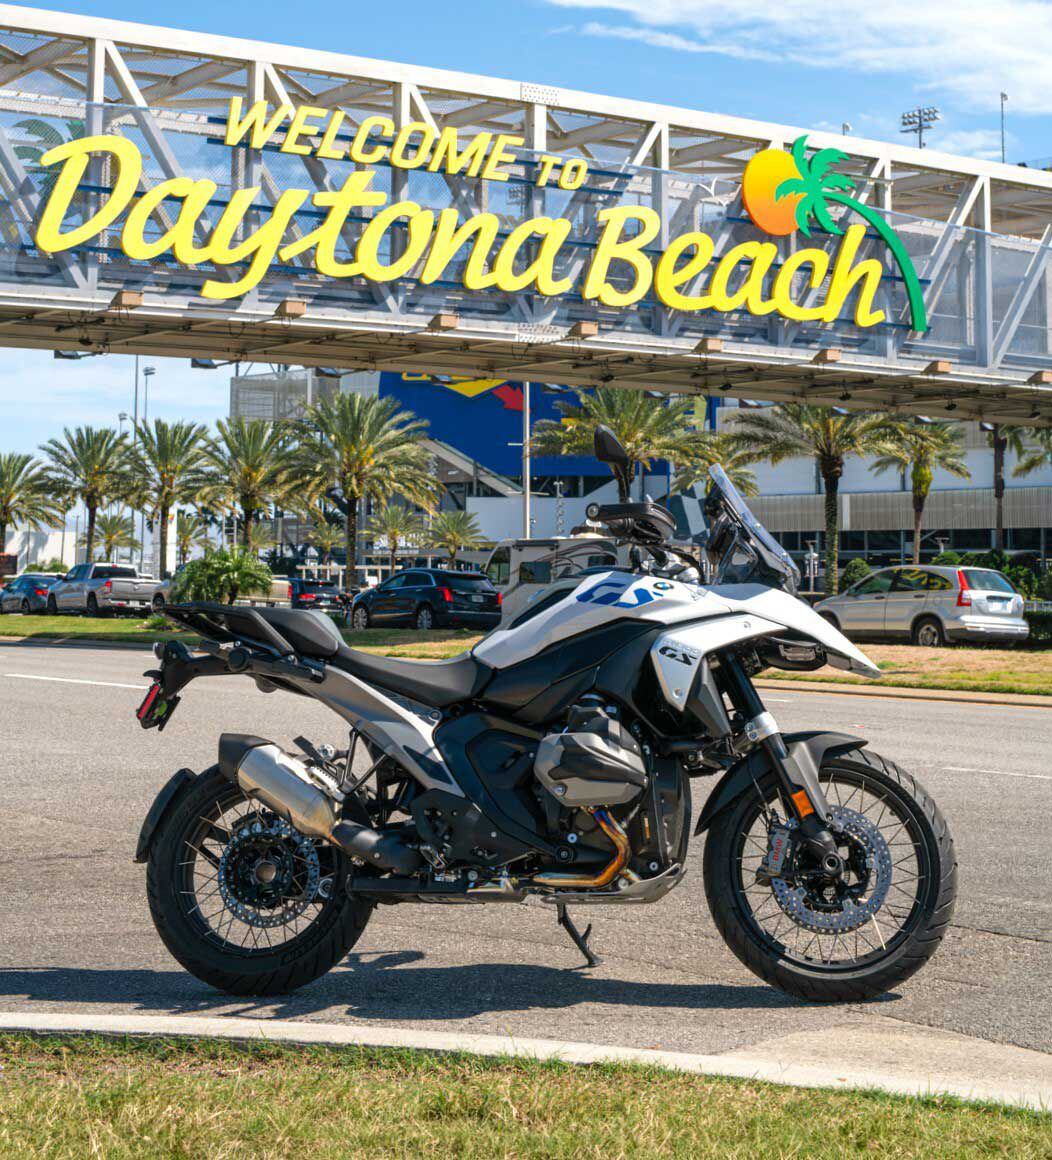 Daytona’s always chock-full of the latest hardware, and BMW was just one of many manufacturers displaying new models and accessories as well as offering demo rides.